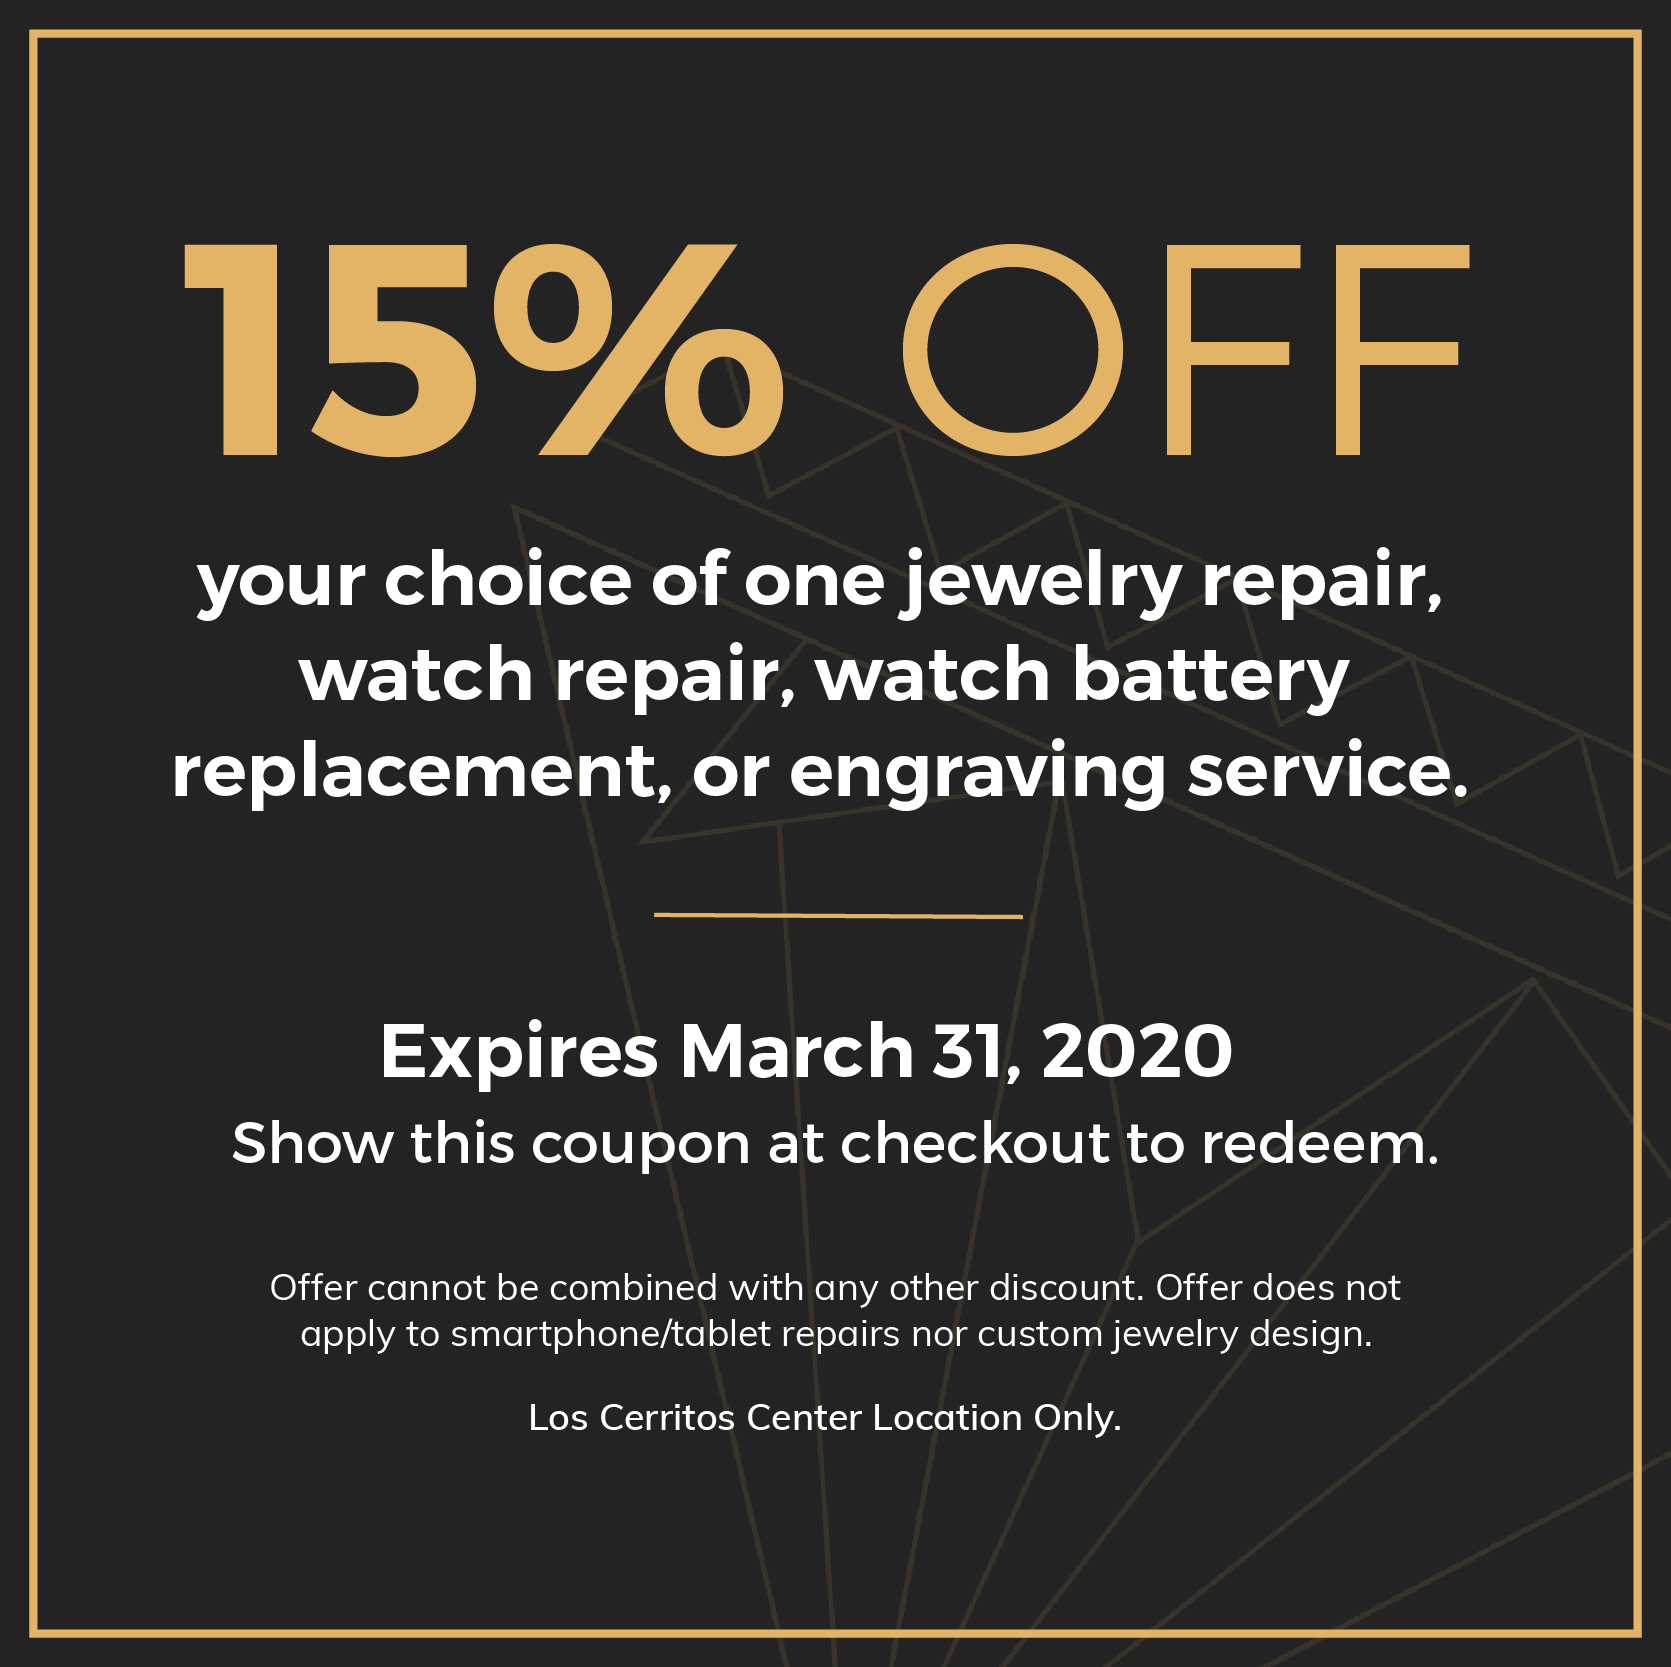 15% OFF. your choice of one jewelry repair, watch repair, watch battery replacement, or engraving service. Expires March 31, 2020. Show this coupon at checkout to redeem. Offer cannot be combined with any other discount. Offer does not apply to smartphone/tablet repairs nor custom jewelry design. Los Cerritos Center Location Only.